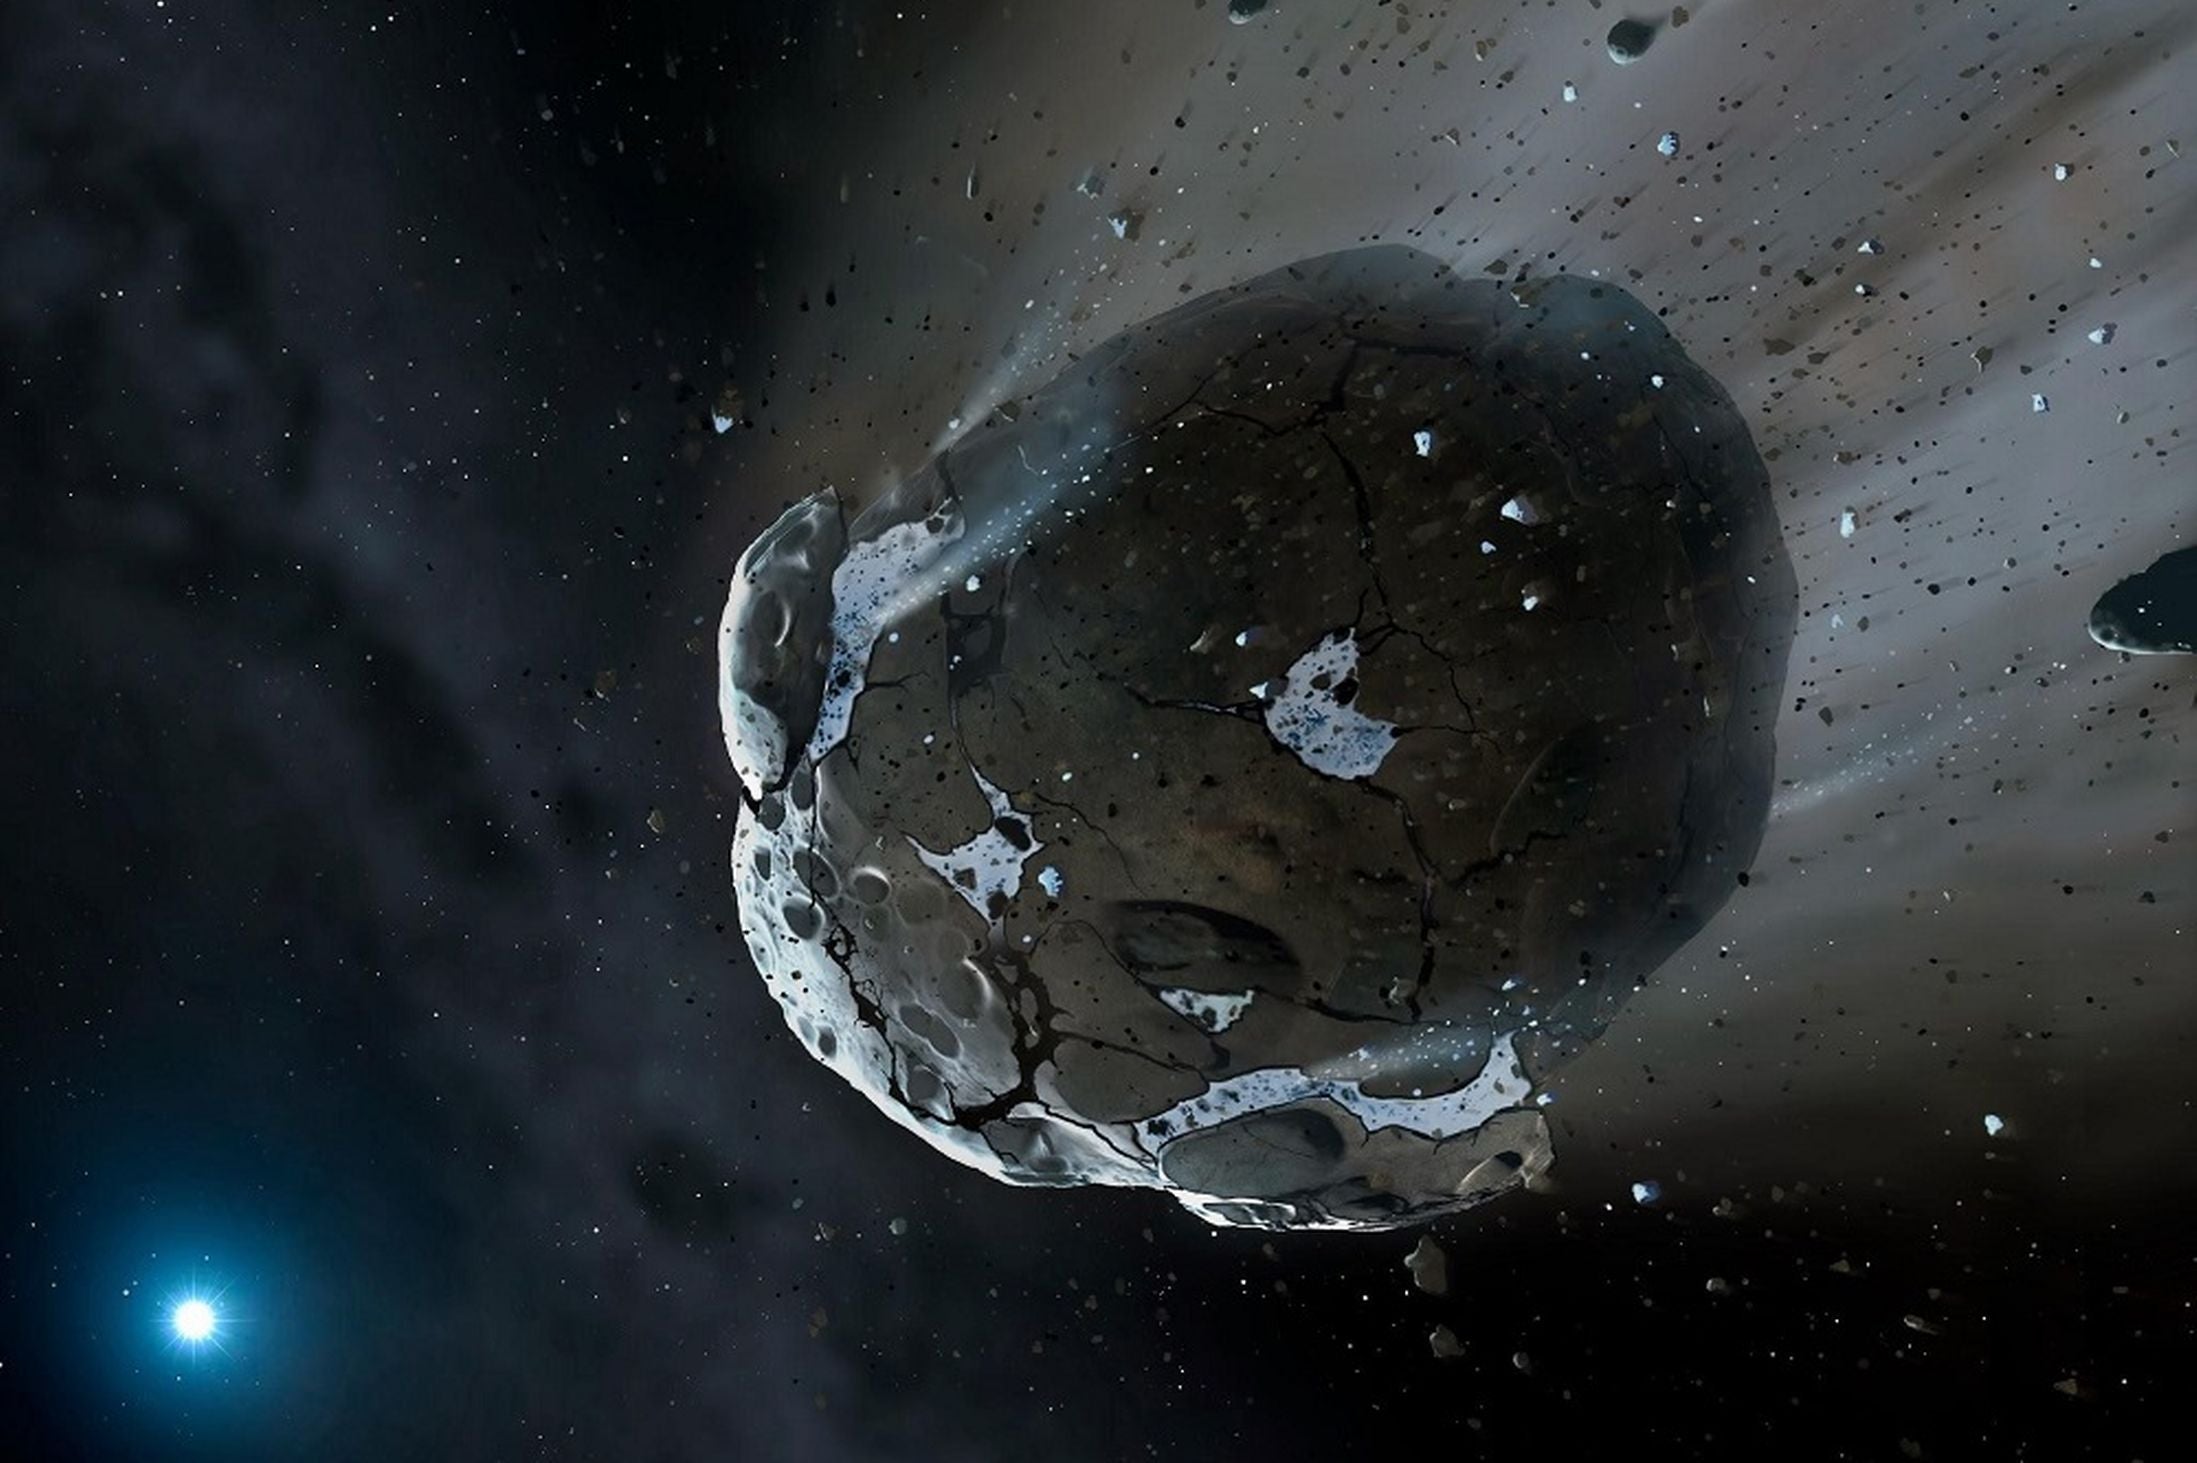 An artist's view of a watery asteroid in a white dwarf star system.